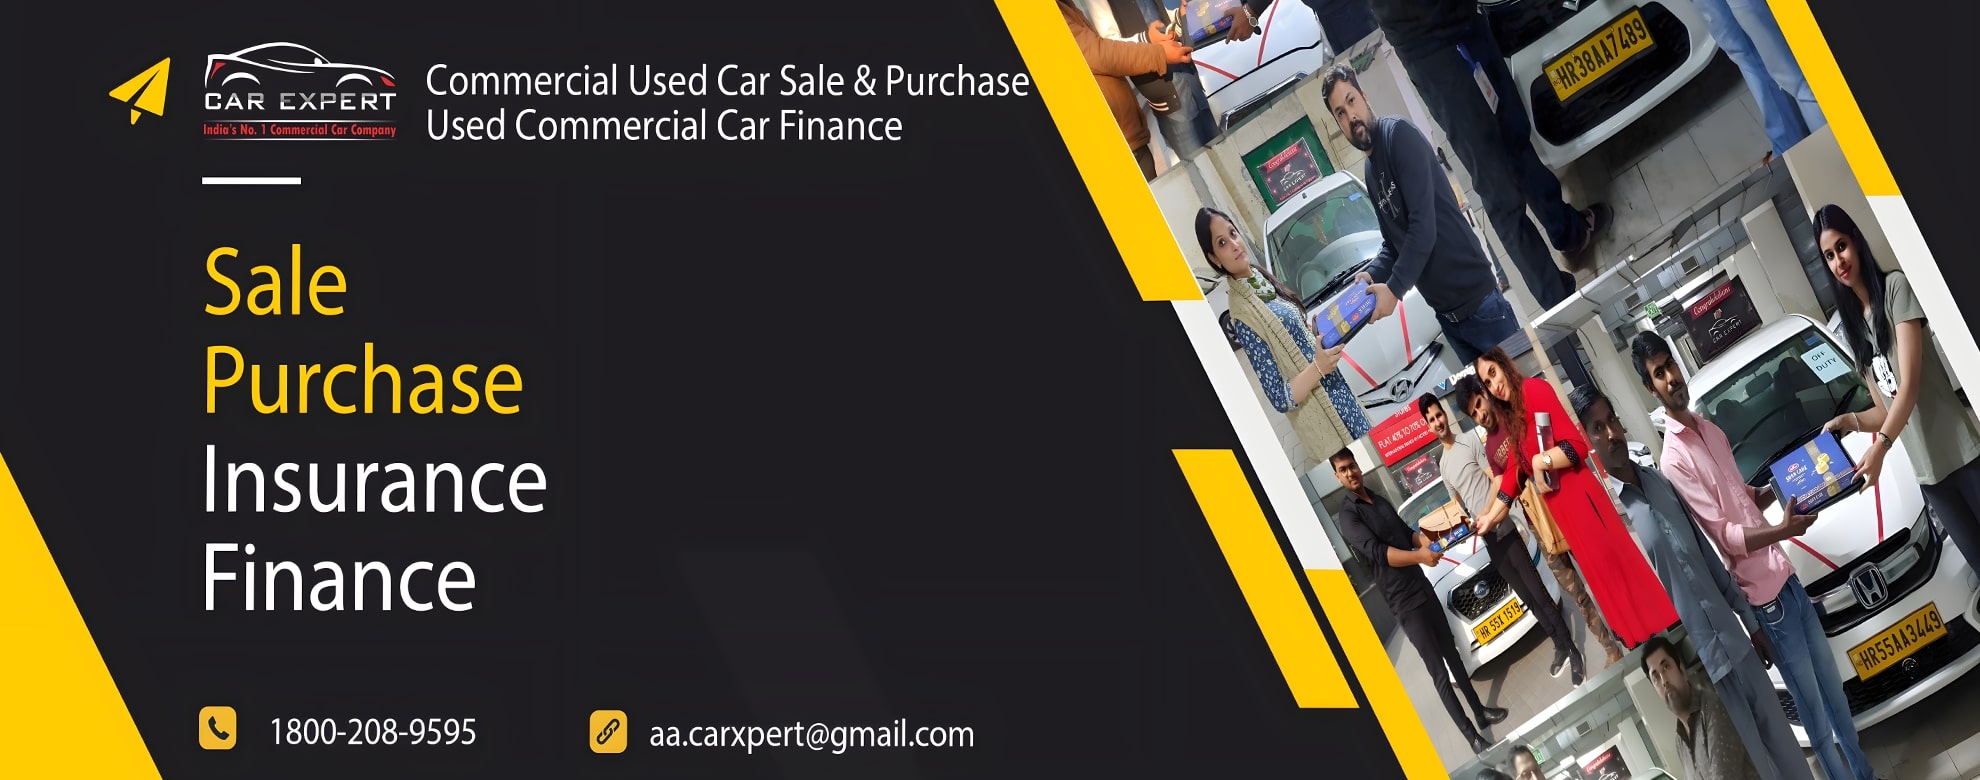 Commercial Car Dealers in Delhi - Buy & Sell Taxi-Car Expert